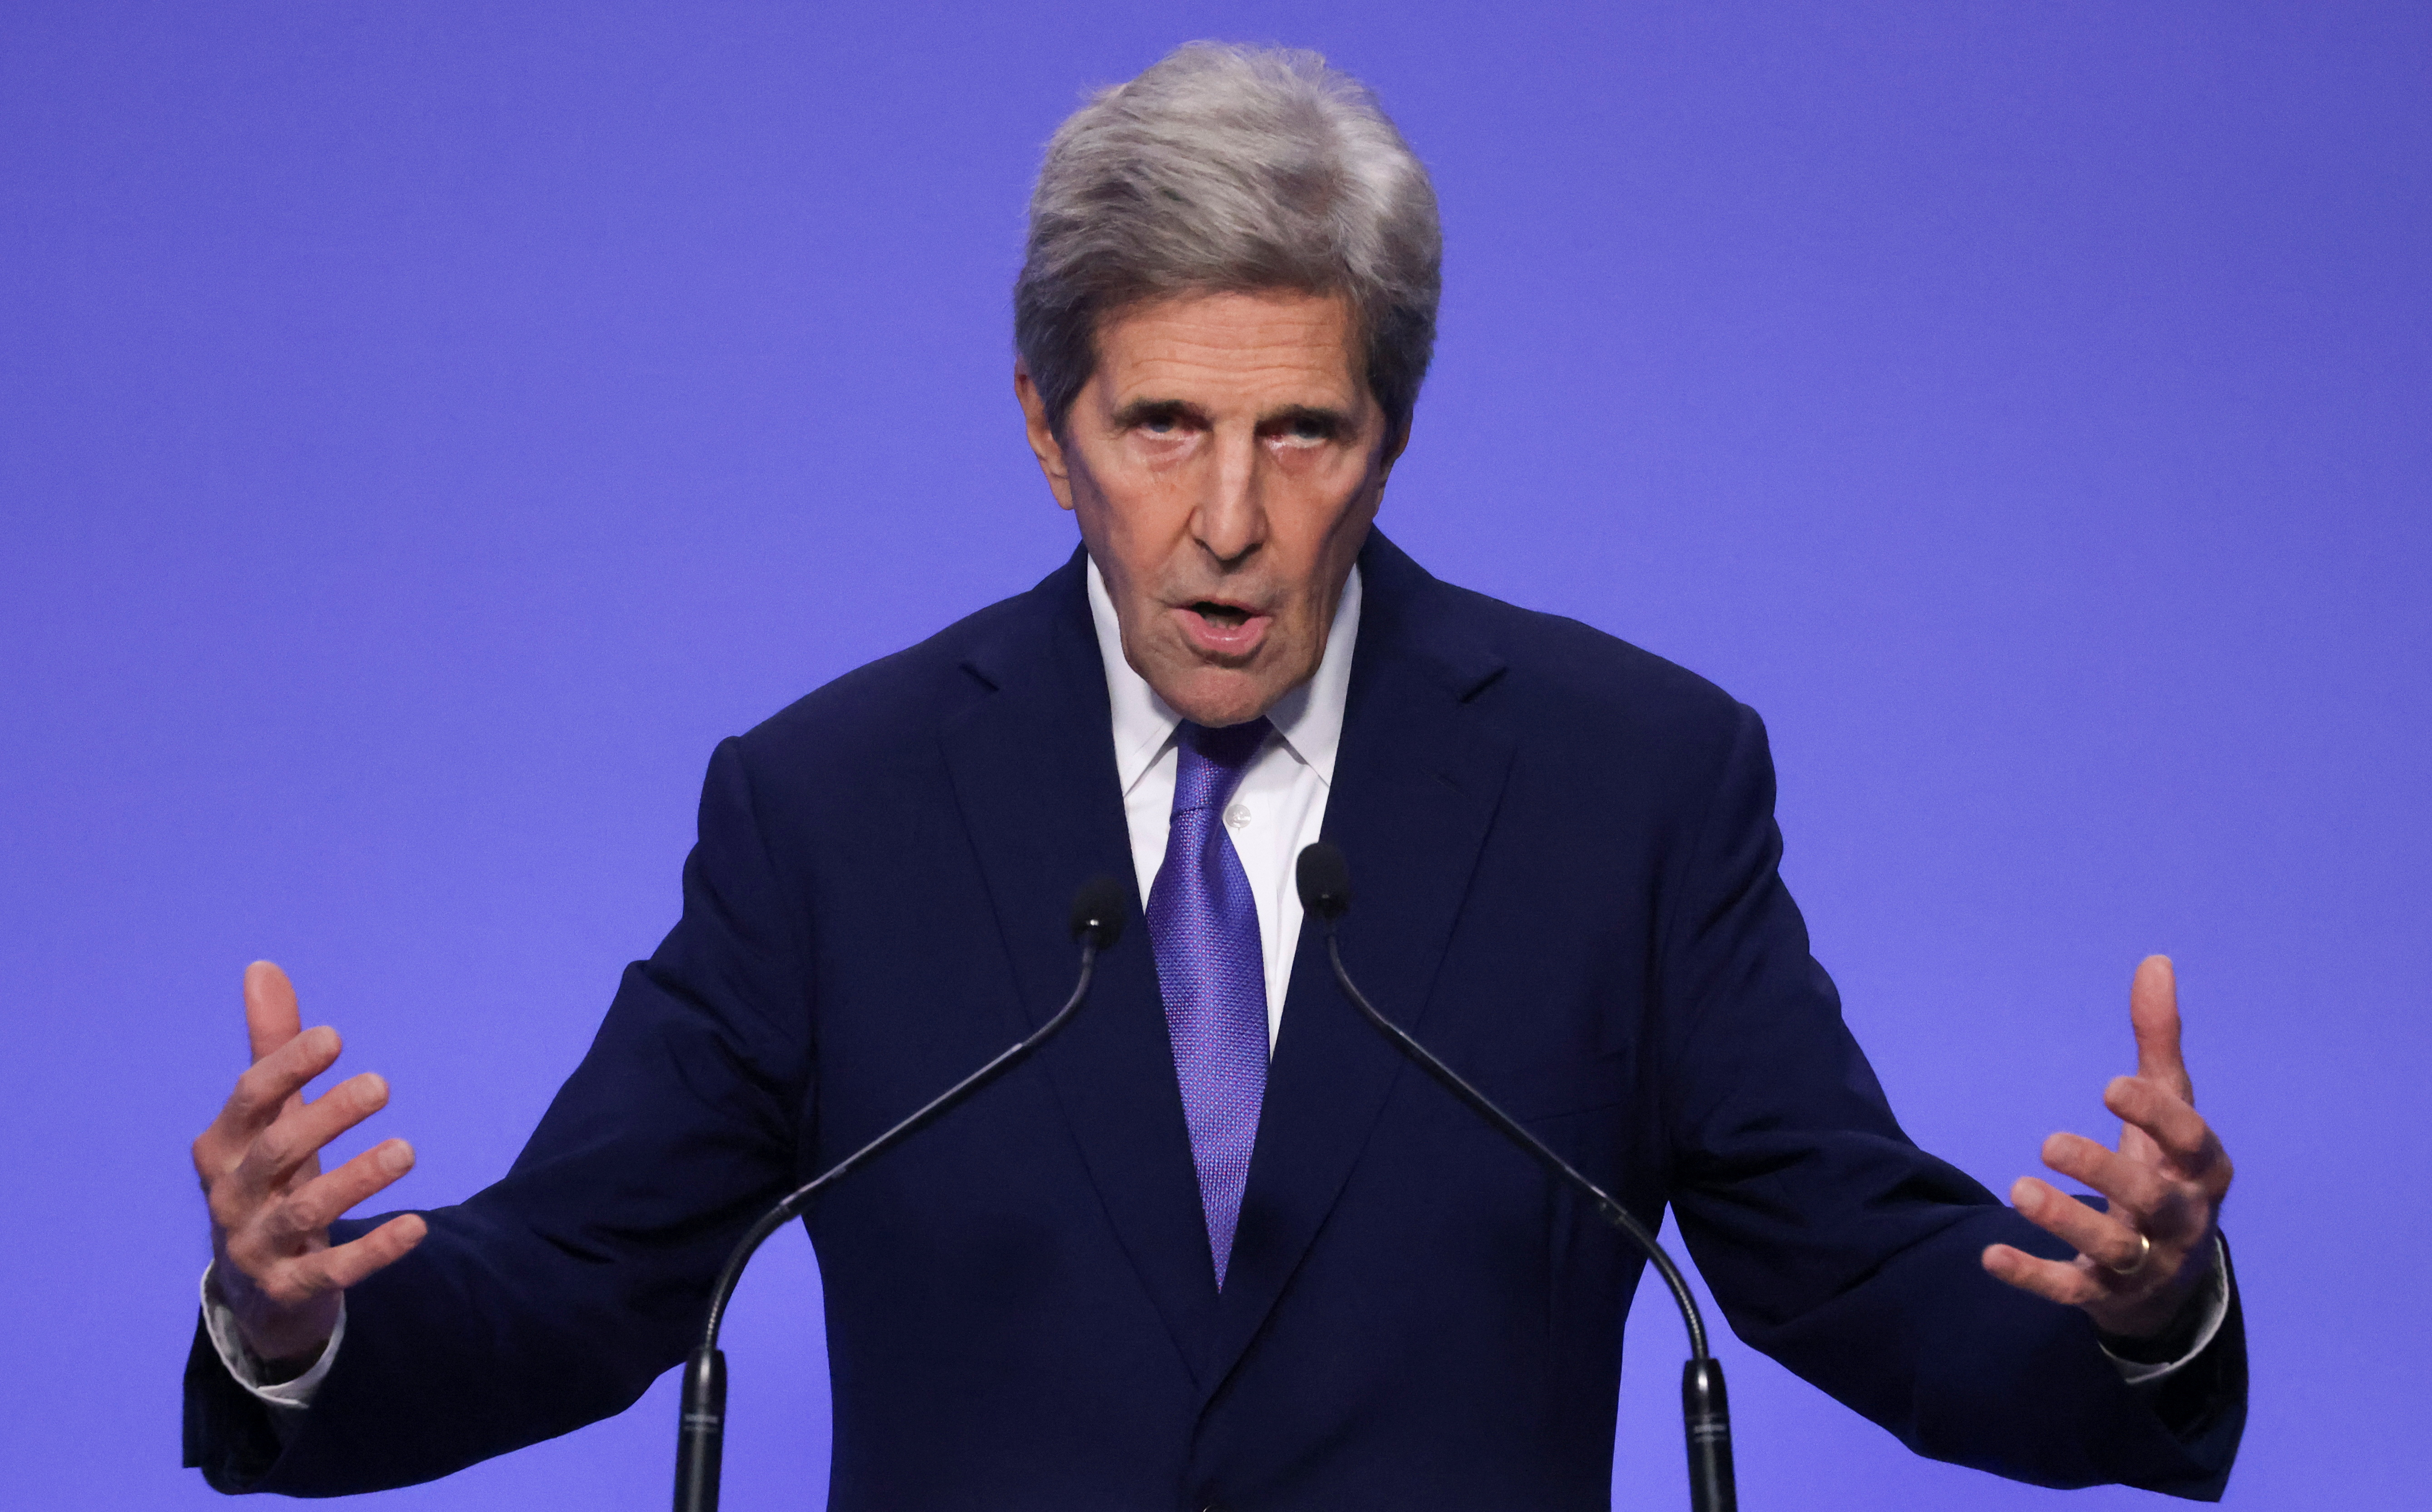 John Kerry at COP26 in Glasgow